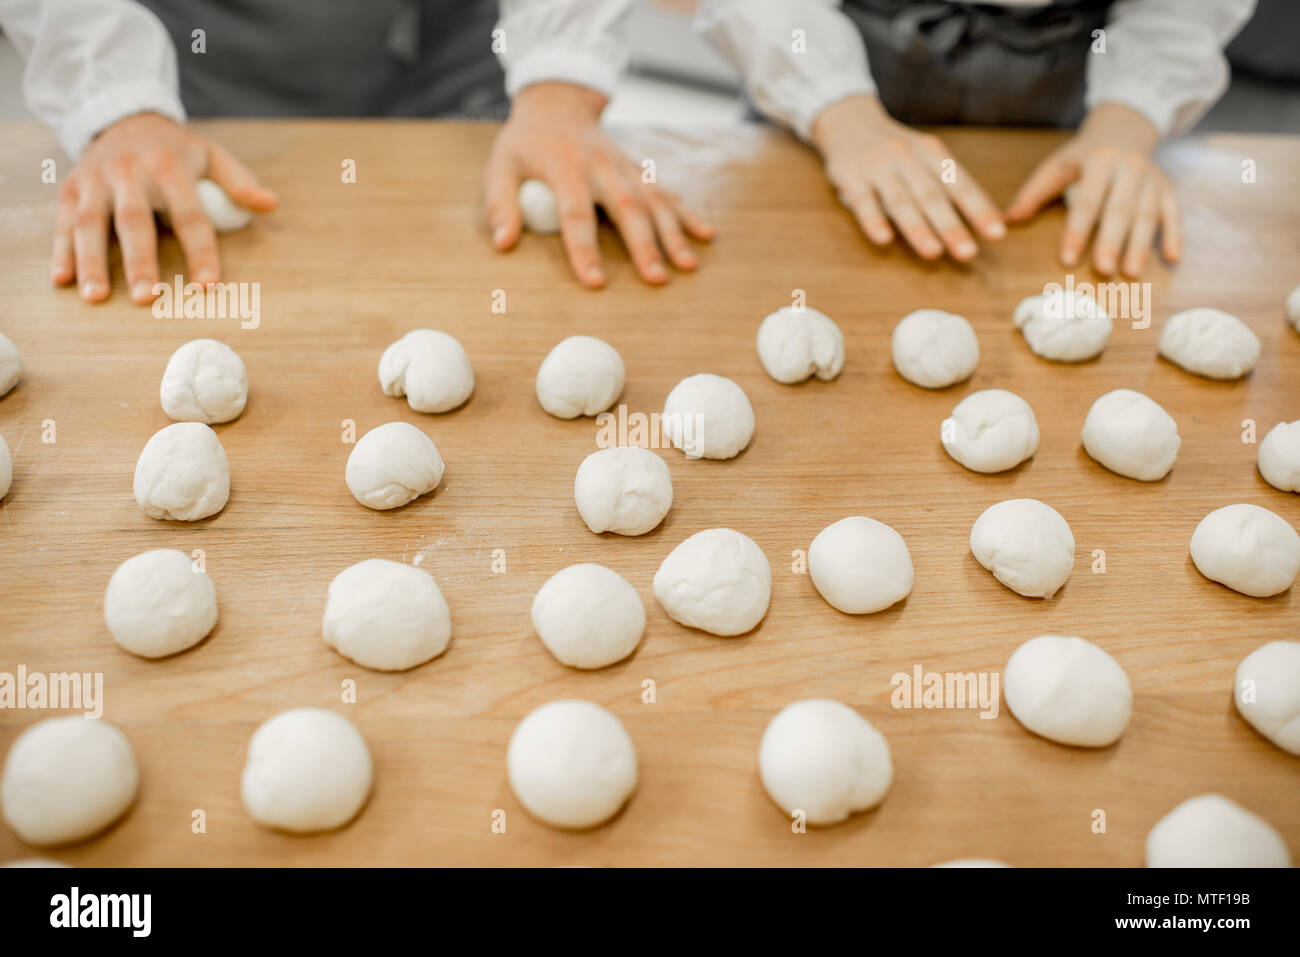 Forming daugh balls for baking buns on the wooden table at the manufacturing Stock Photo